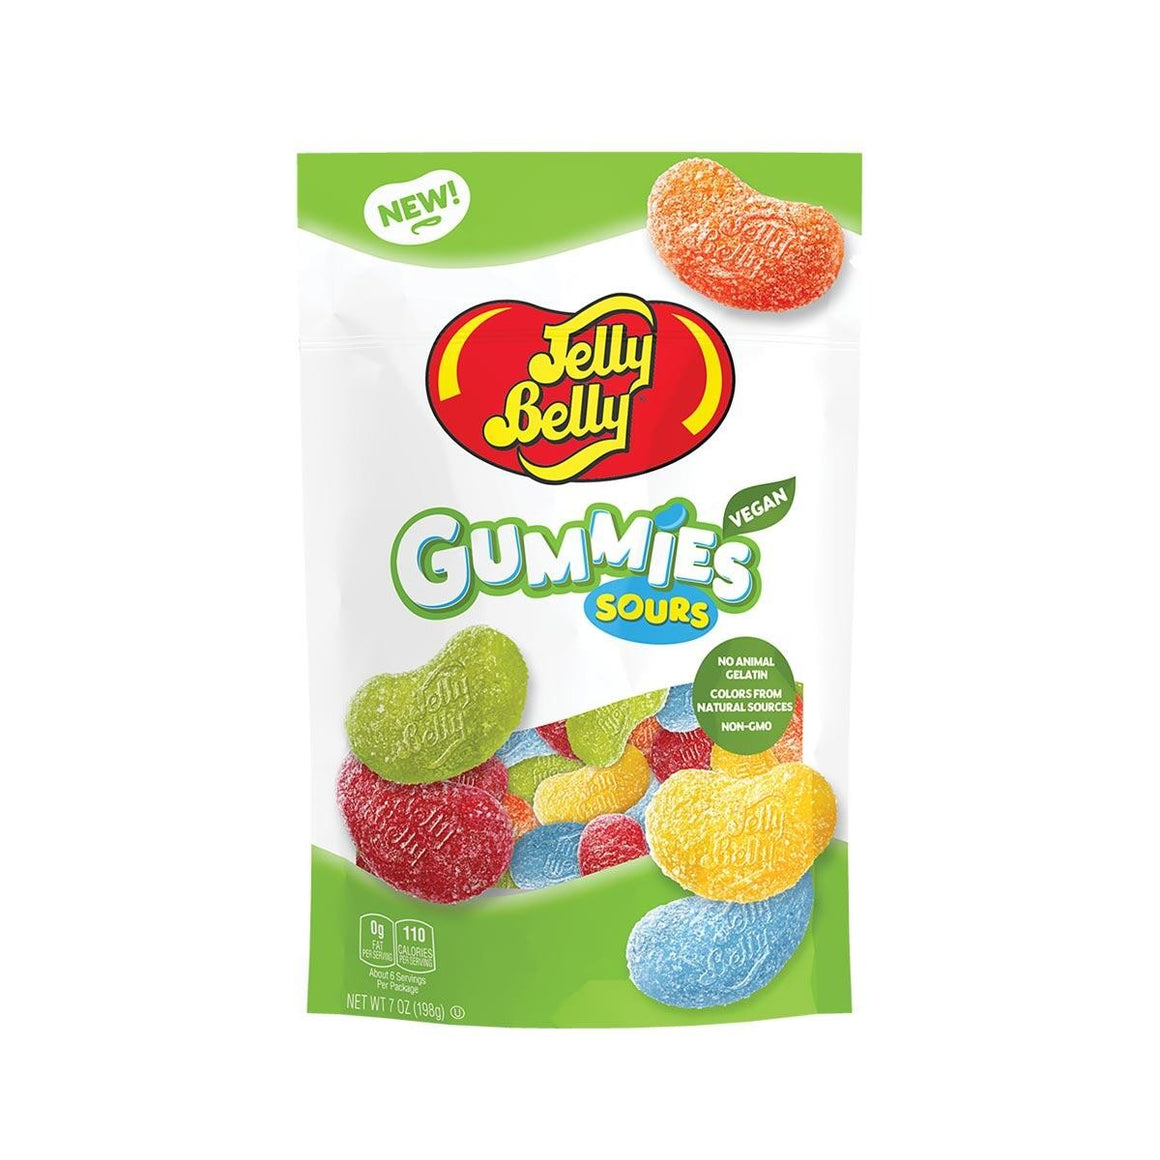 All City Candy Jelly Belly Gummies Sours 7 oz Bag Gummi Jelly Belly For fresh candy and great service, visit www.allcitycandy.com